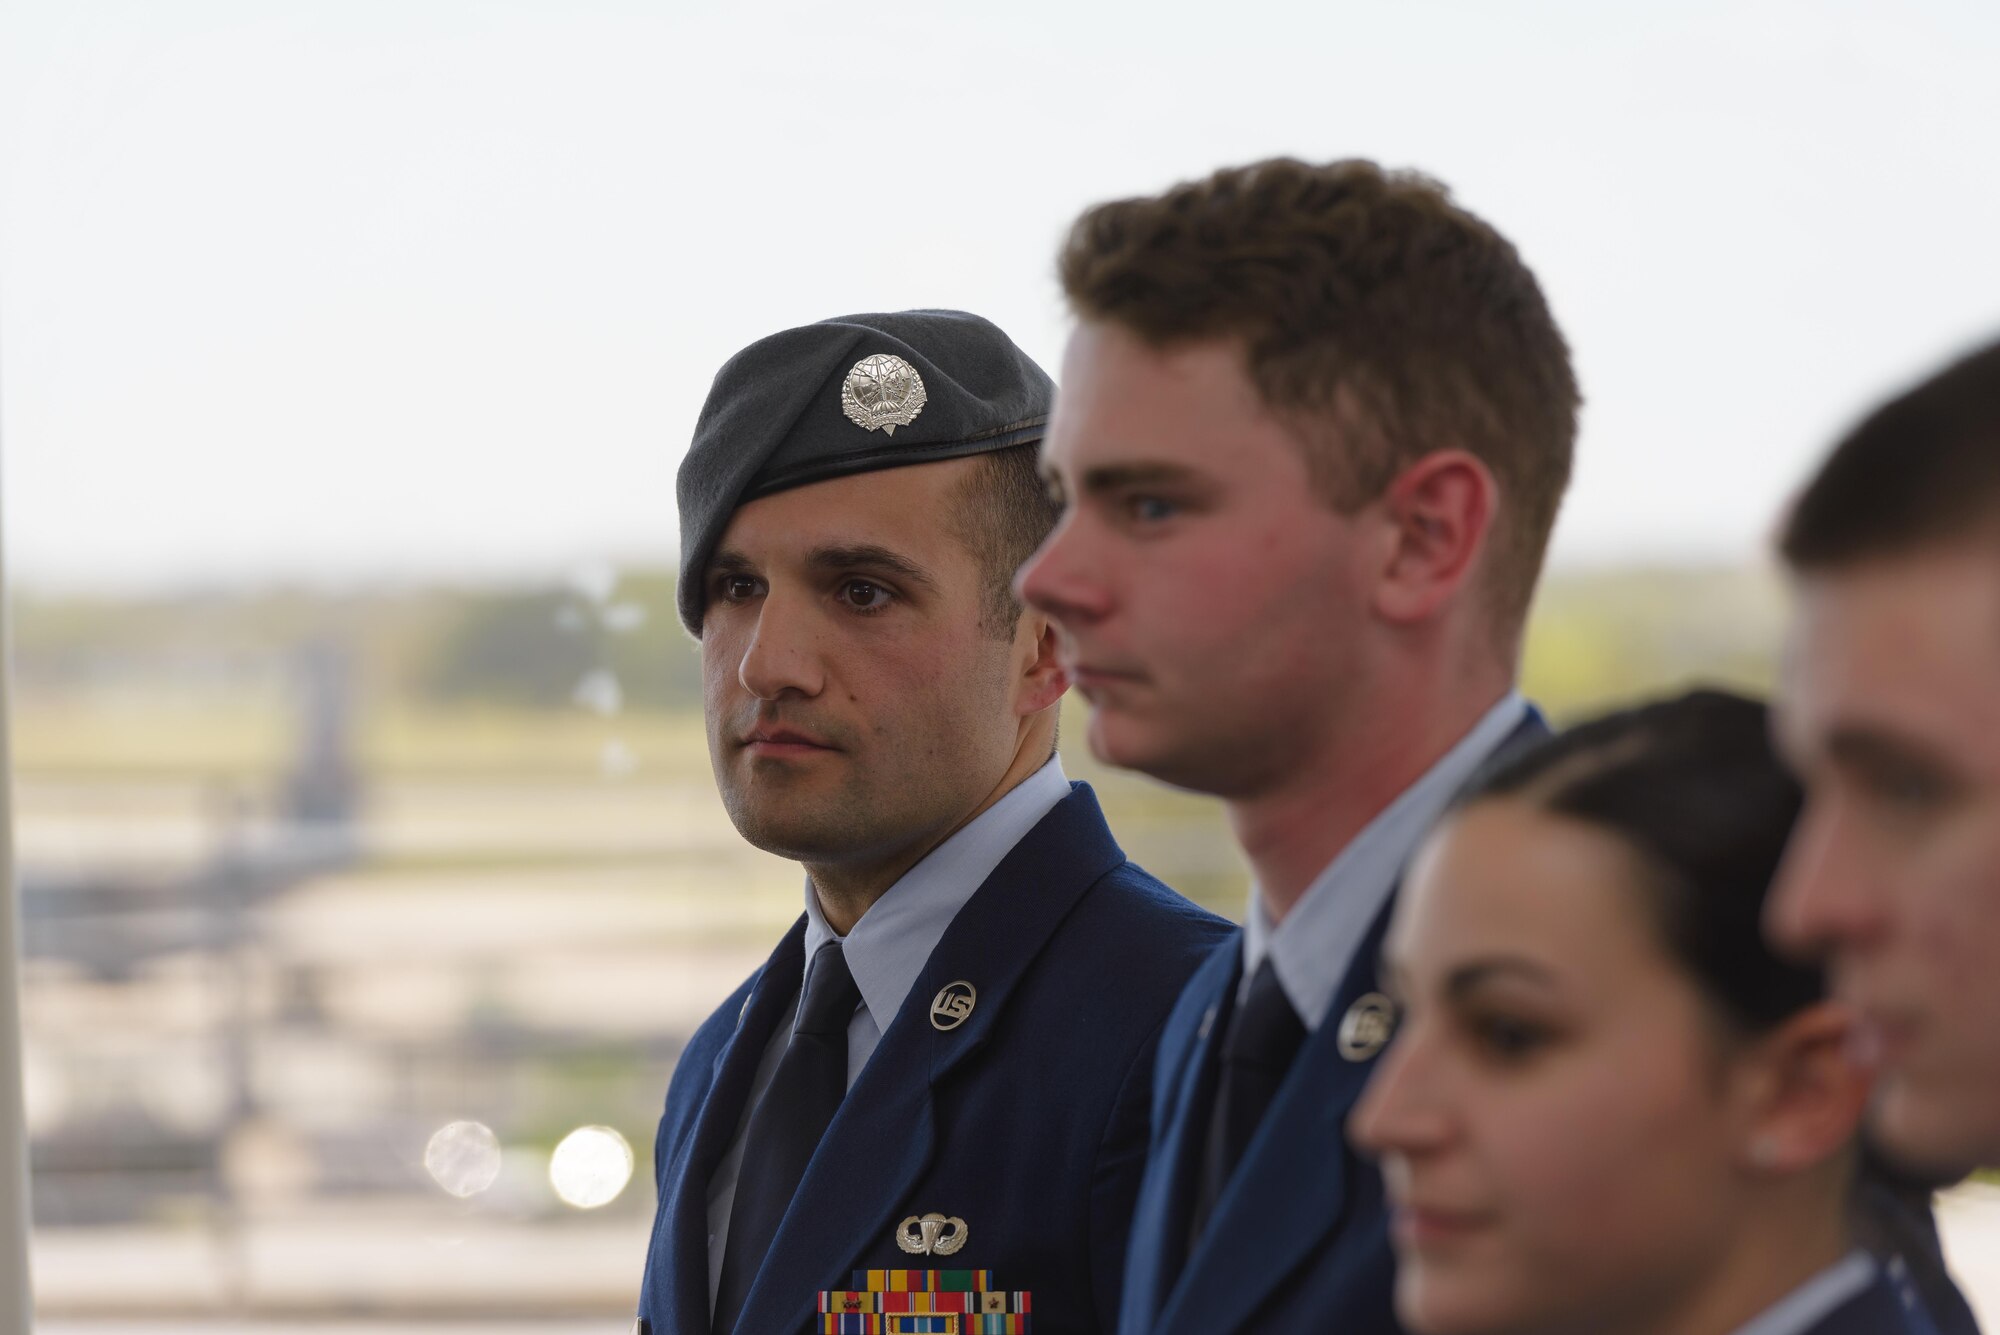 Senior Airman Matthew James, 335th Training Squadron student, listens to the guest speaker during a Special Operations Weather Apprentice Course graduation ceremony at the Weather Training Complex, March 22, 2017, on Keesler Air Force Base, Miss. At his graduation James received his Gray Beret. (U.S. Air Force photo by Andre’ Askew) 